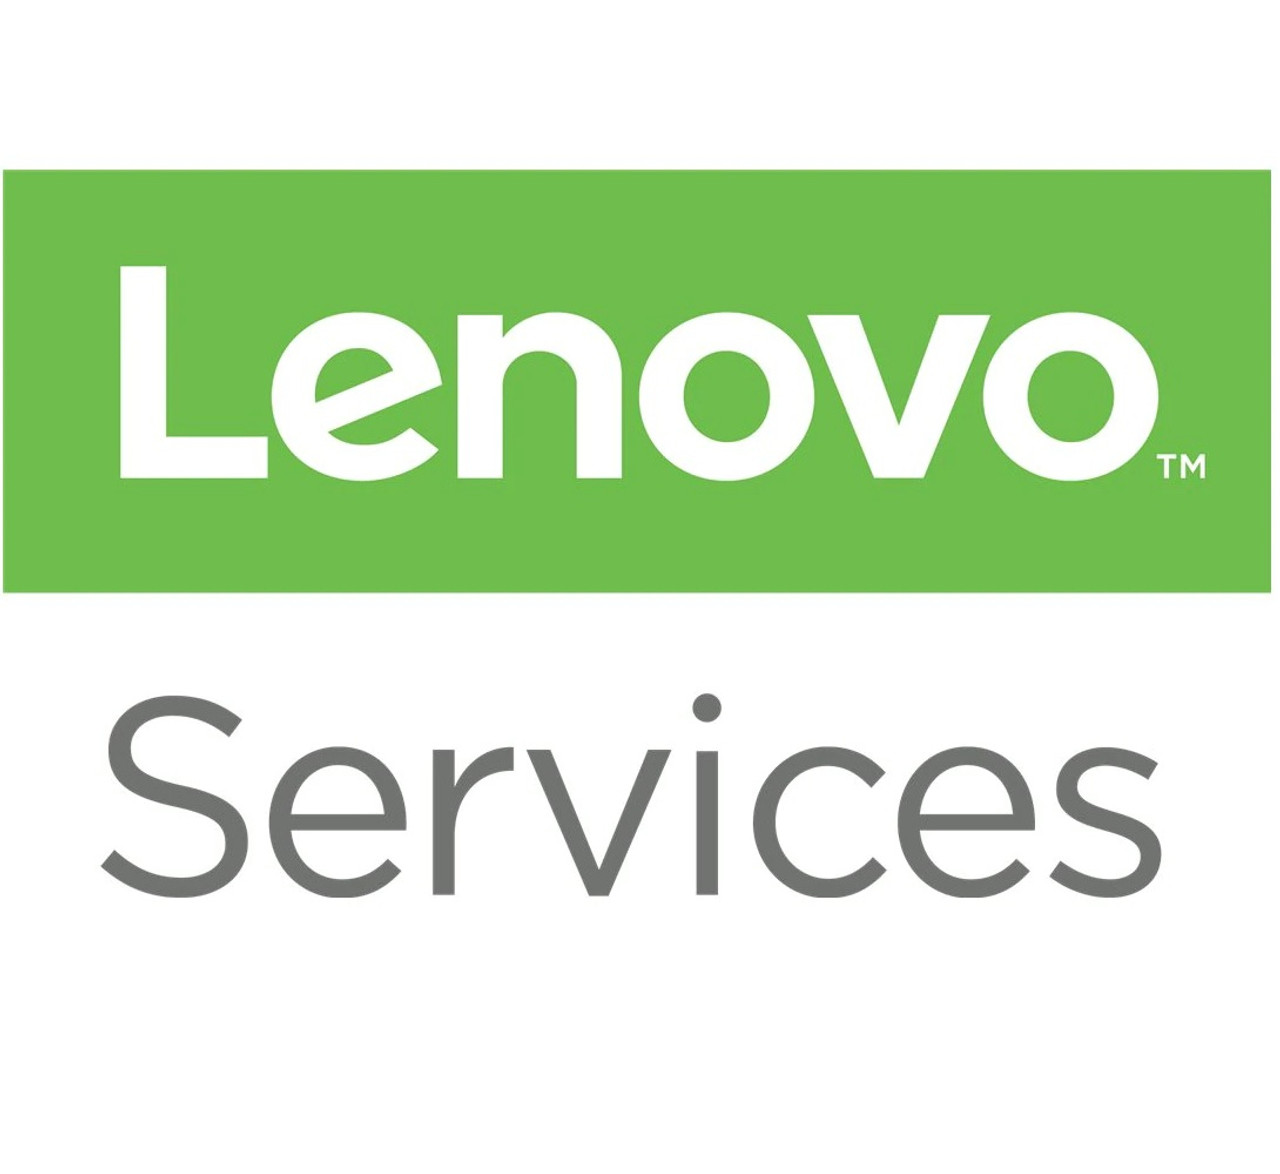 Lenovo International Services Entitlement Add On - Extended service agreement - zone coverage extension - 4 years - for ThinkCentre Edge 93z, ThinkCentre M90a, M90a Gen 3, M910z, M920z AIO, M93z, X1